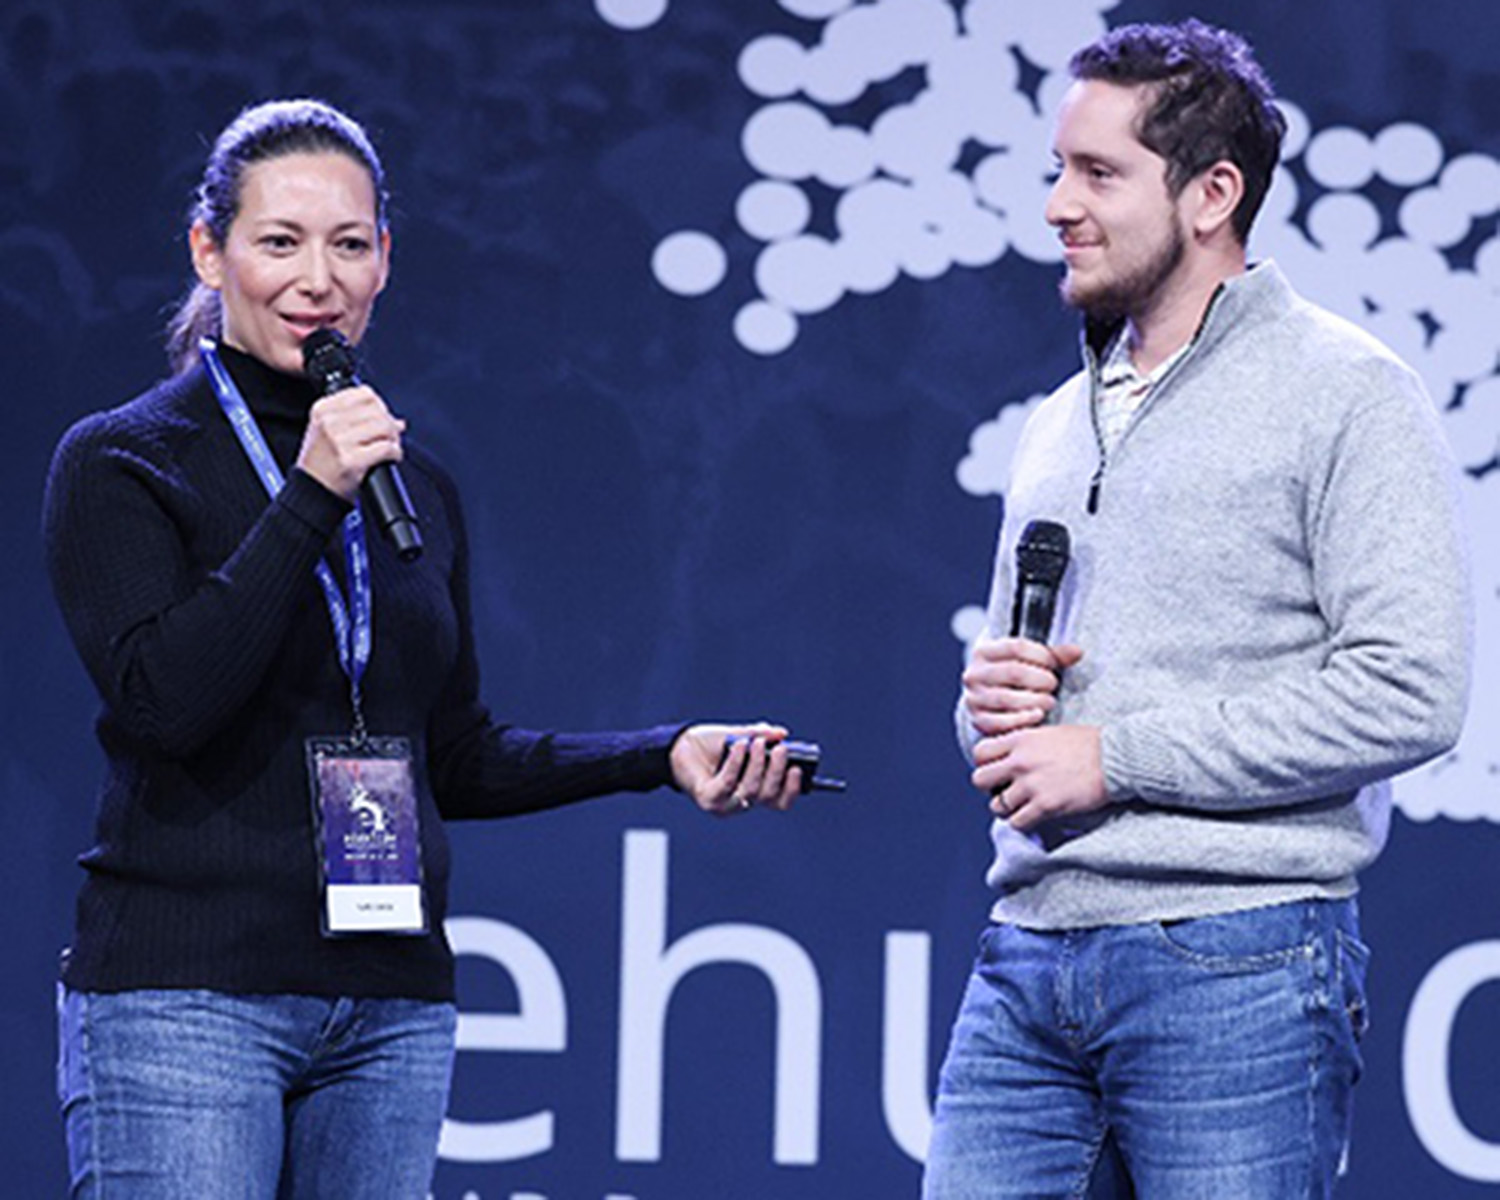 Man and woman speaking into microphone.